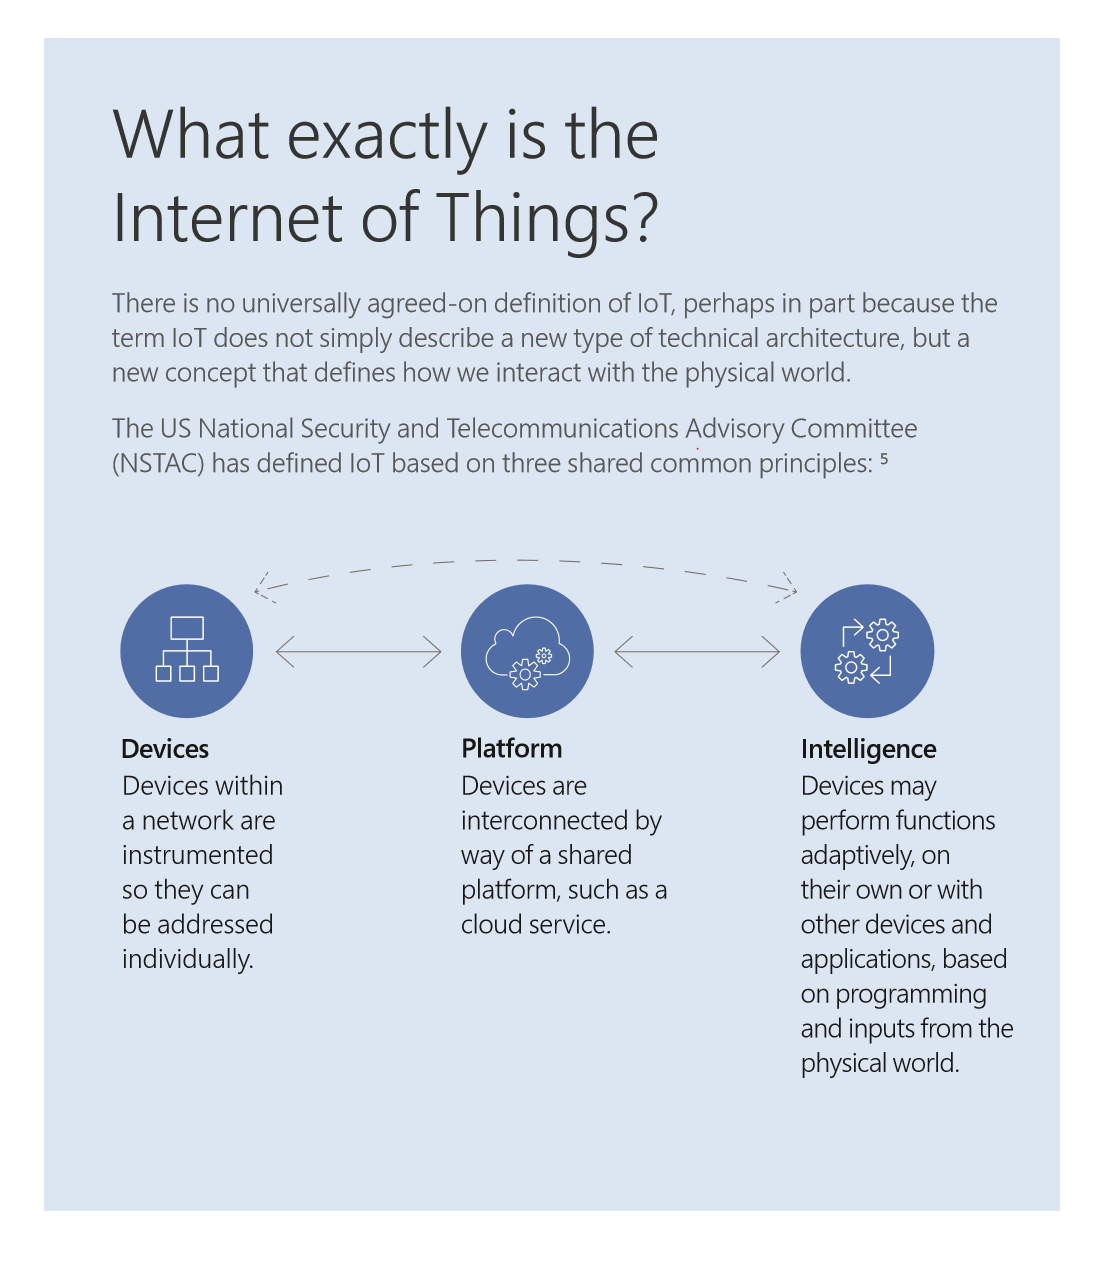 Graphic entitled "What exactly is the Internet of Things" shows relationship between devices, platform and intelligence